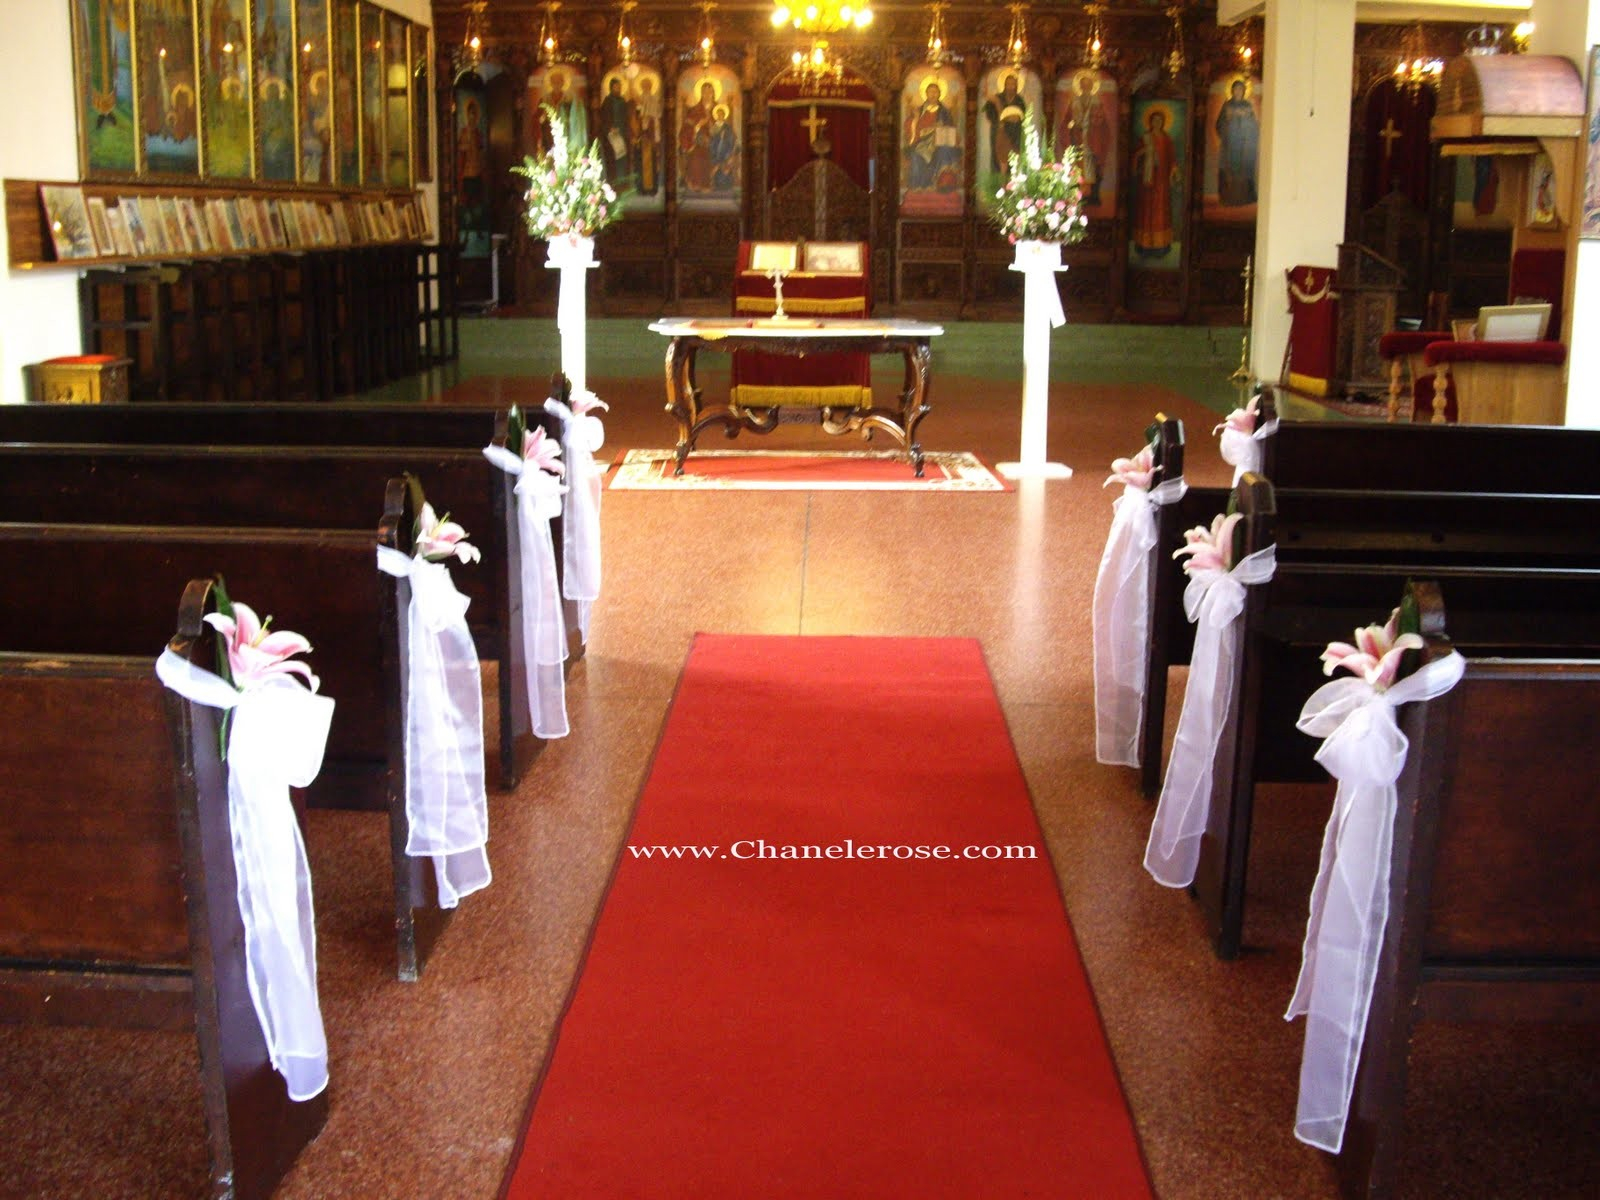 Wedding Chapel Decorations Simple Church Decorations For